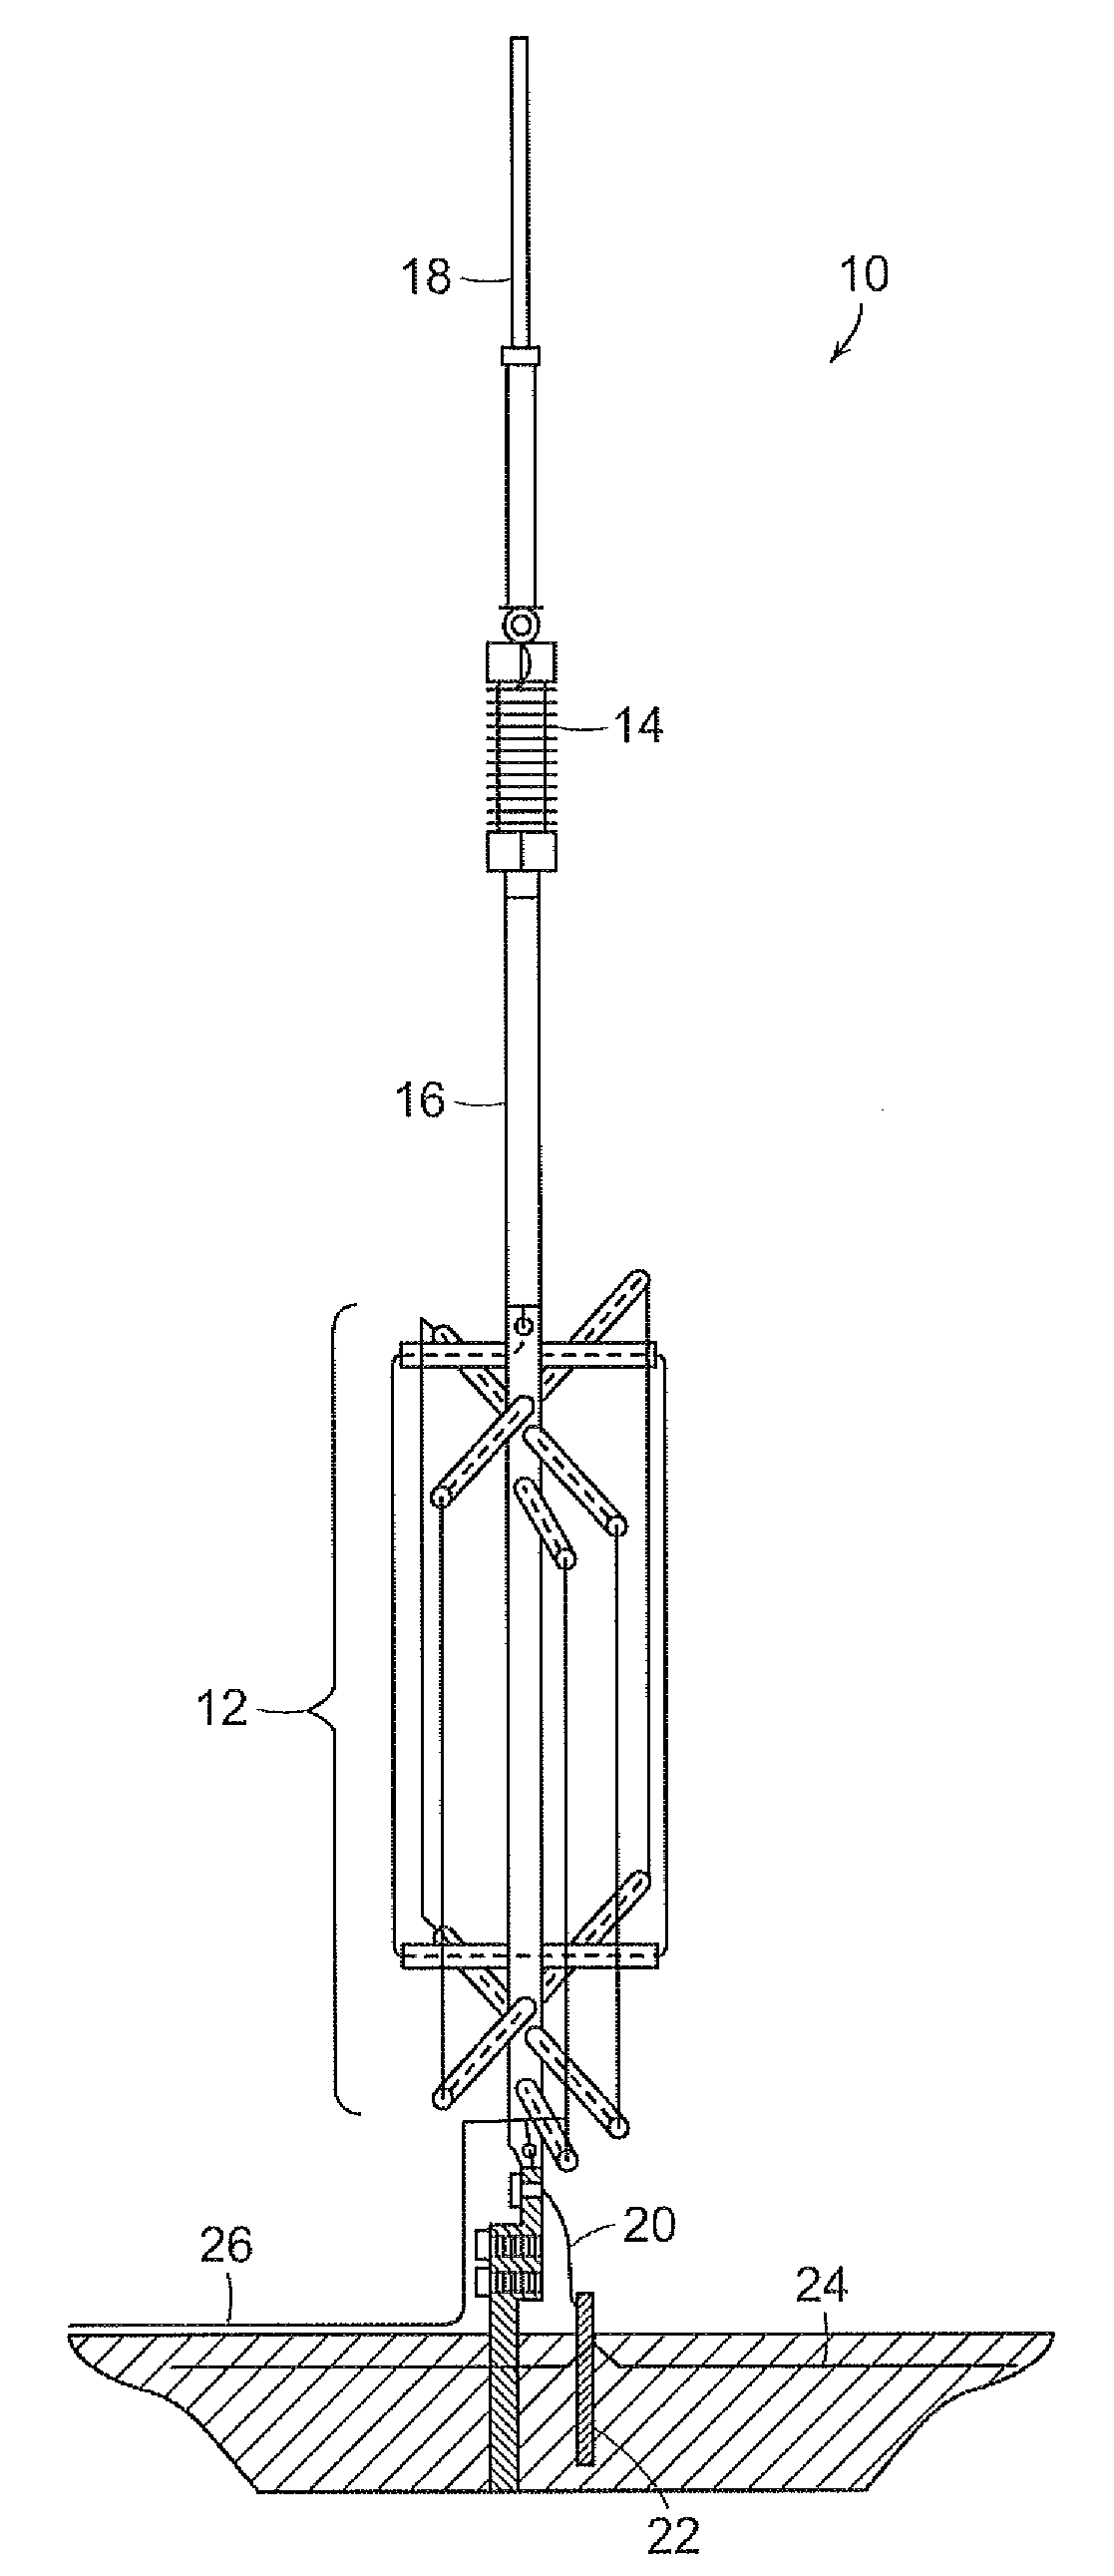 Systems and methods for providing distributed load monopole antenna systems